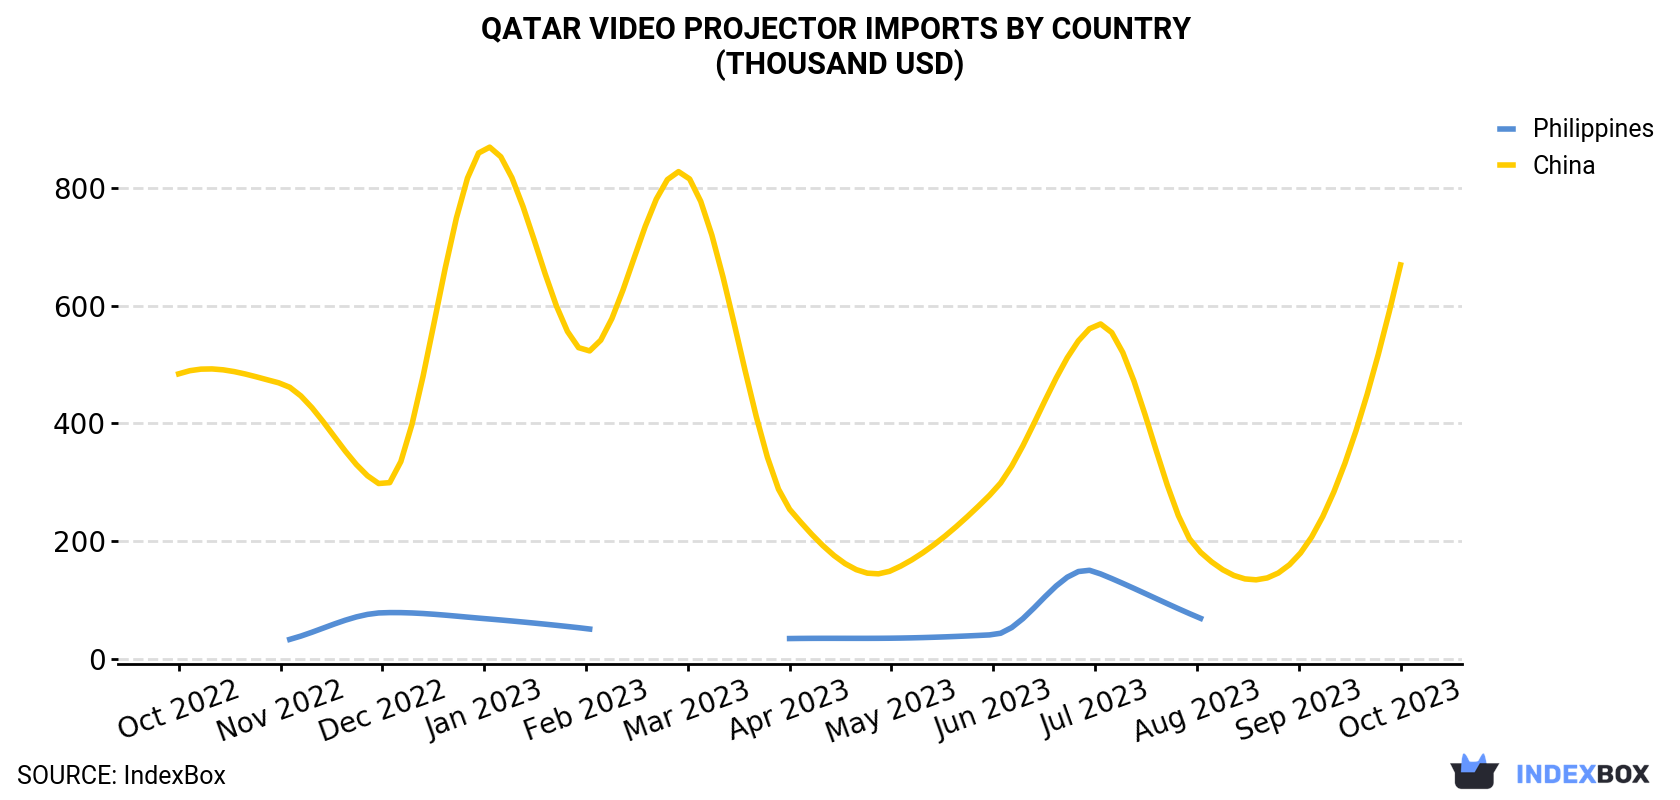 Qatar Video Projector Imports By Country (Thousand USD)